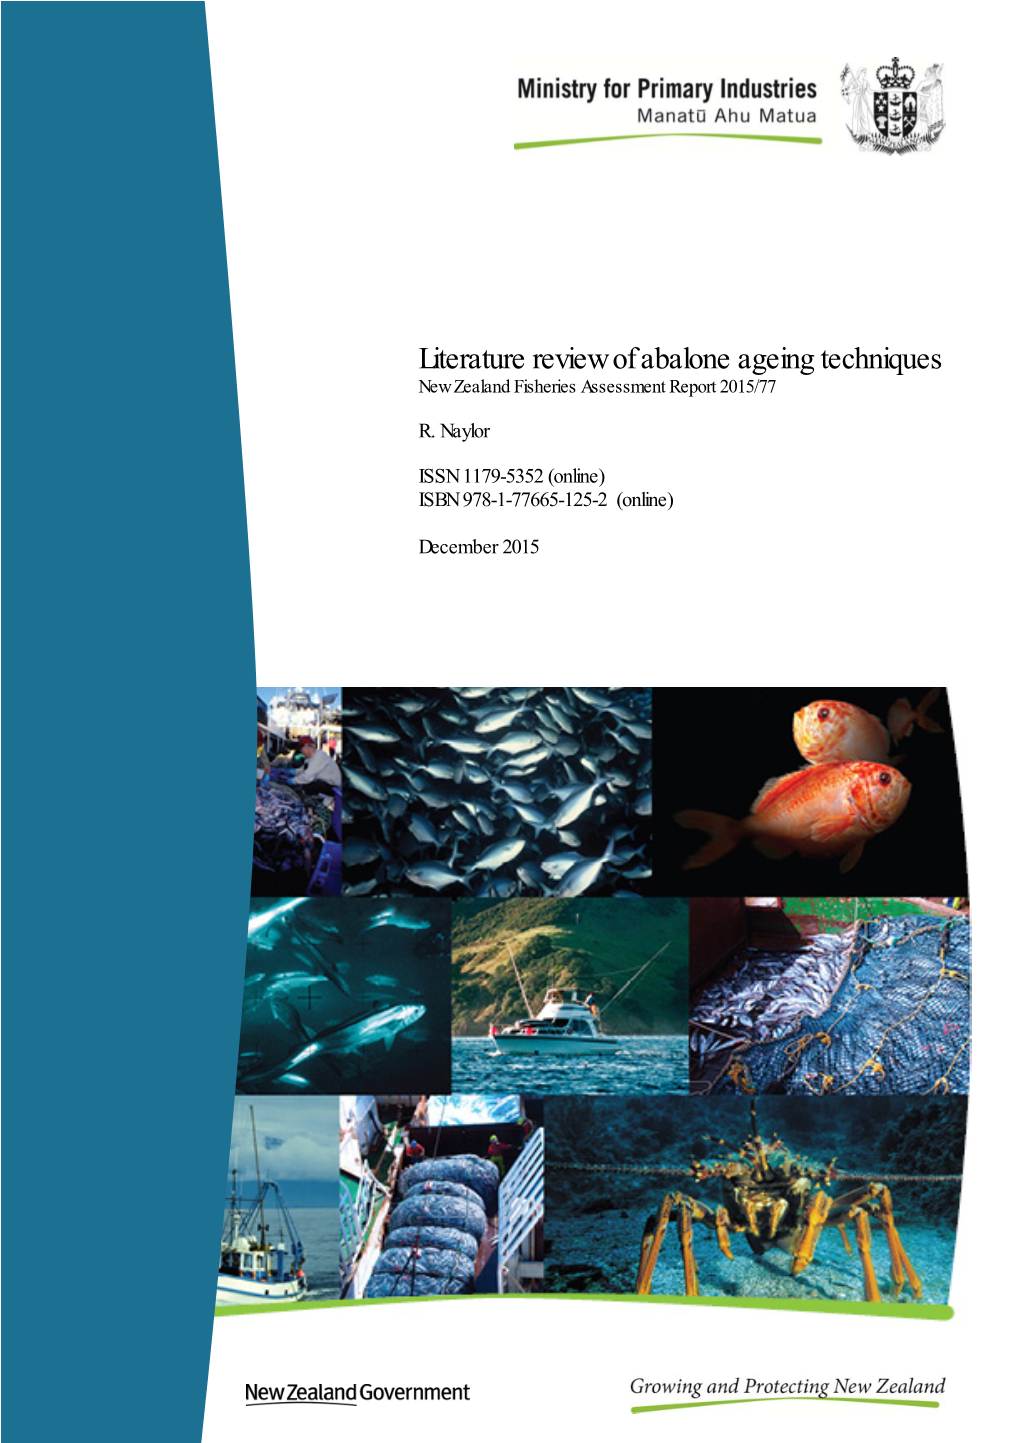 Literature Review of Abalone Ageing Techniques. New Zealand Fisheries Assessment Report 2015/77